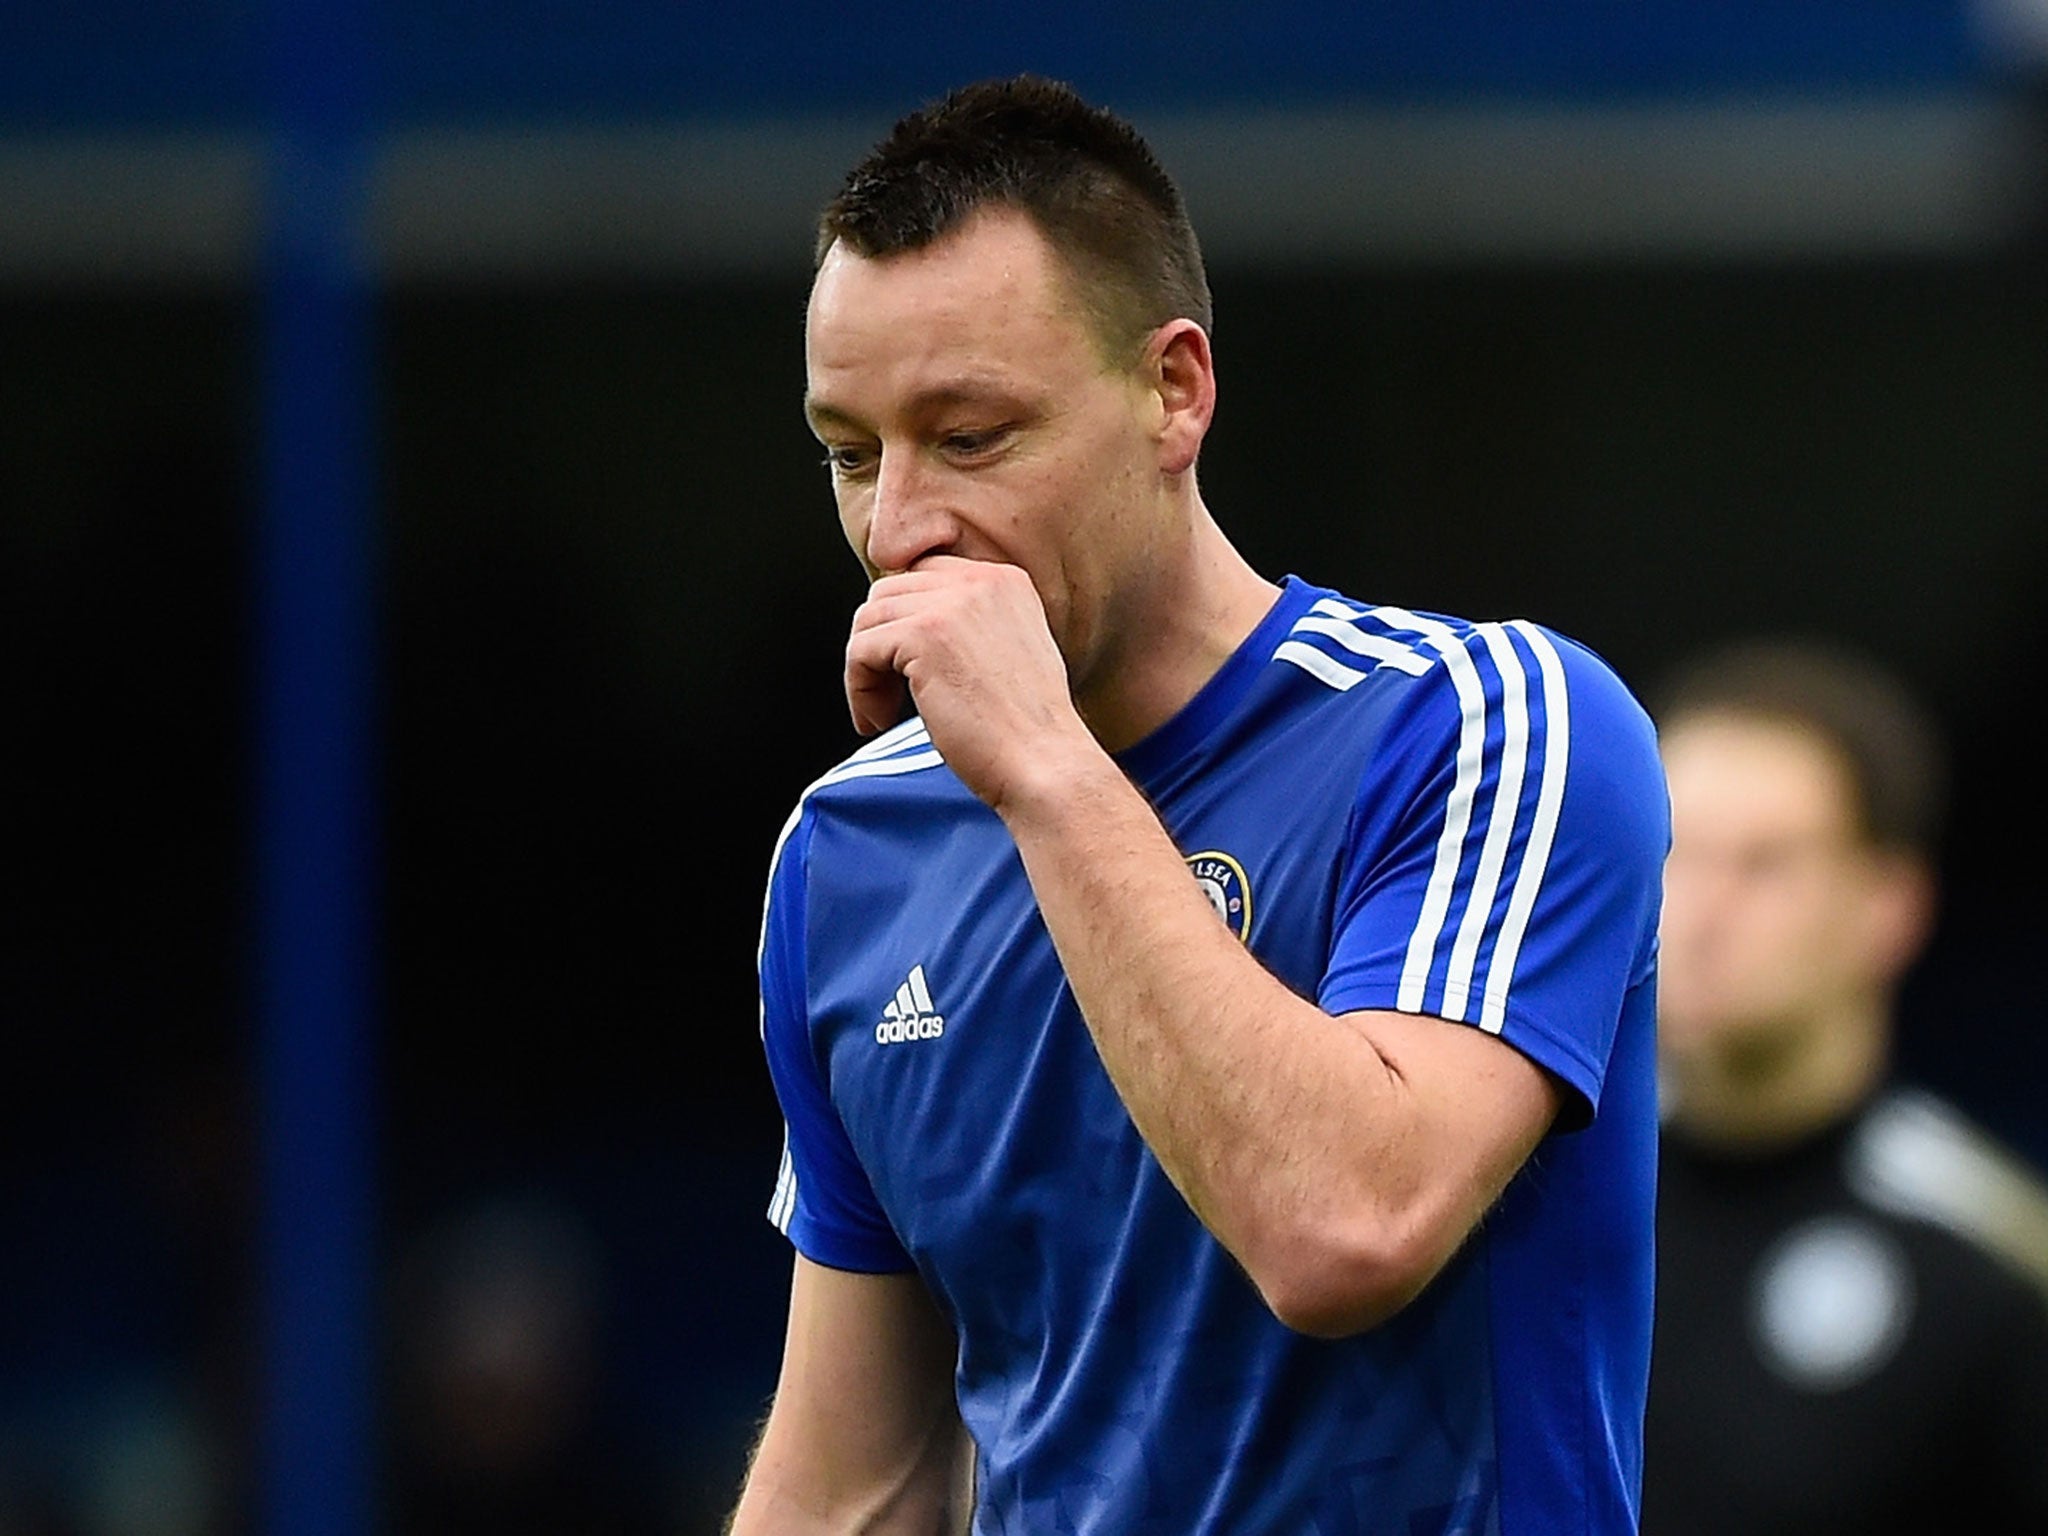 John Terry ahead of Chelsea's match with Manchester United